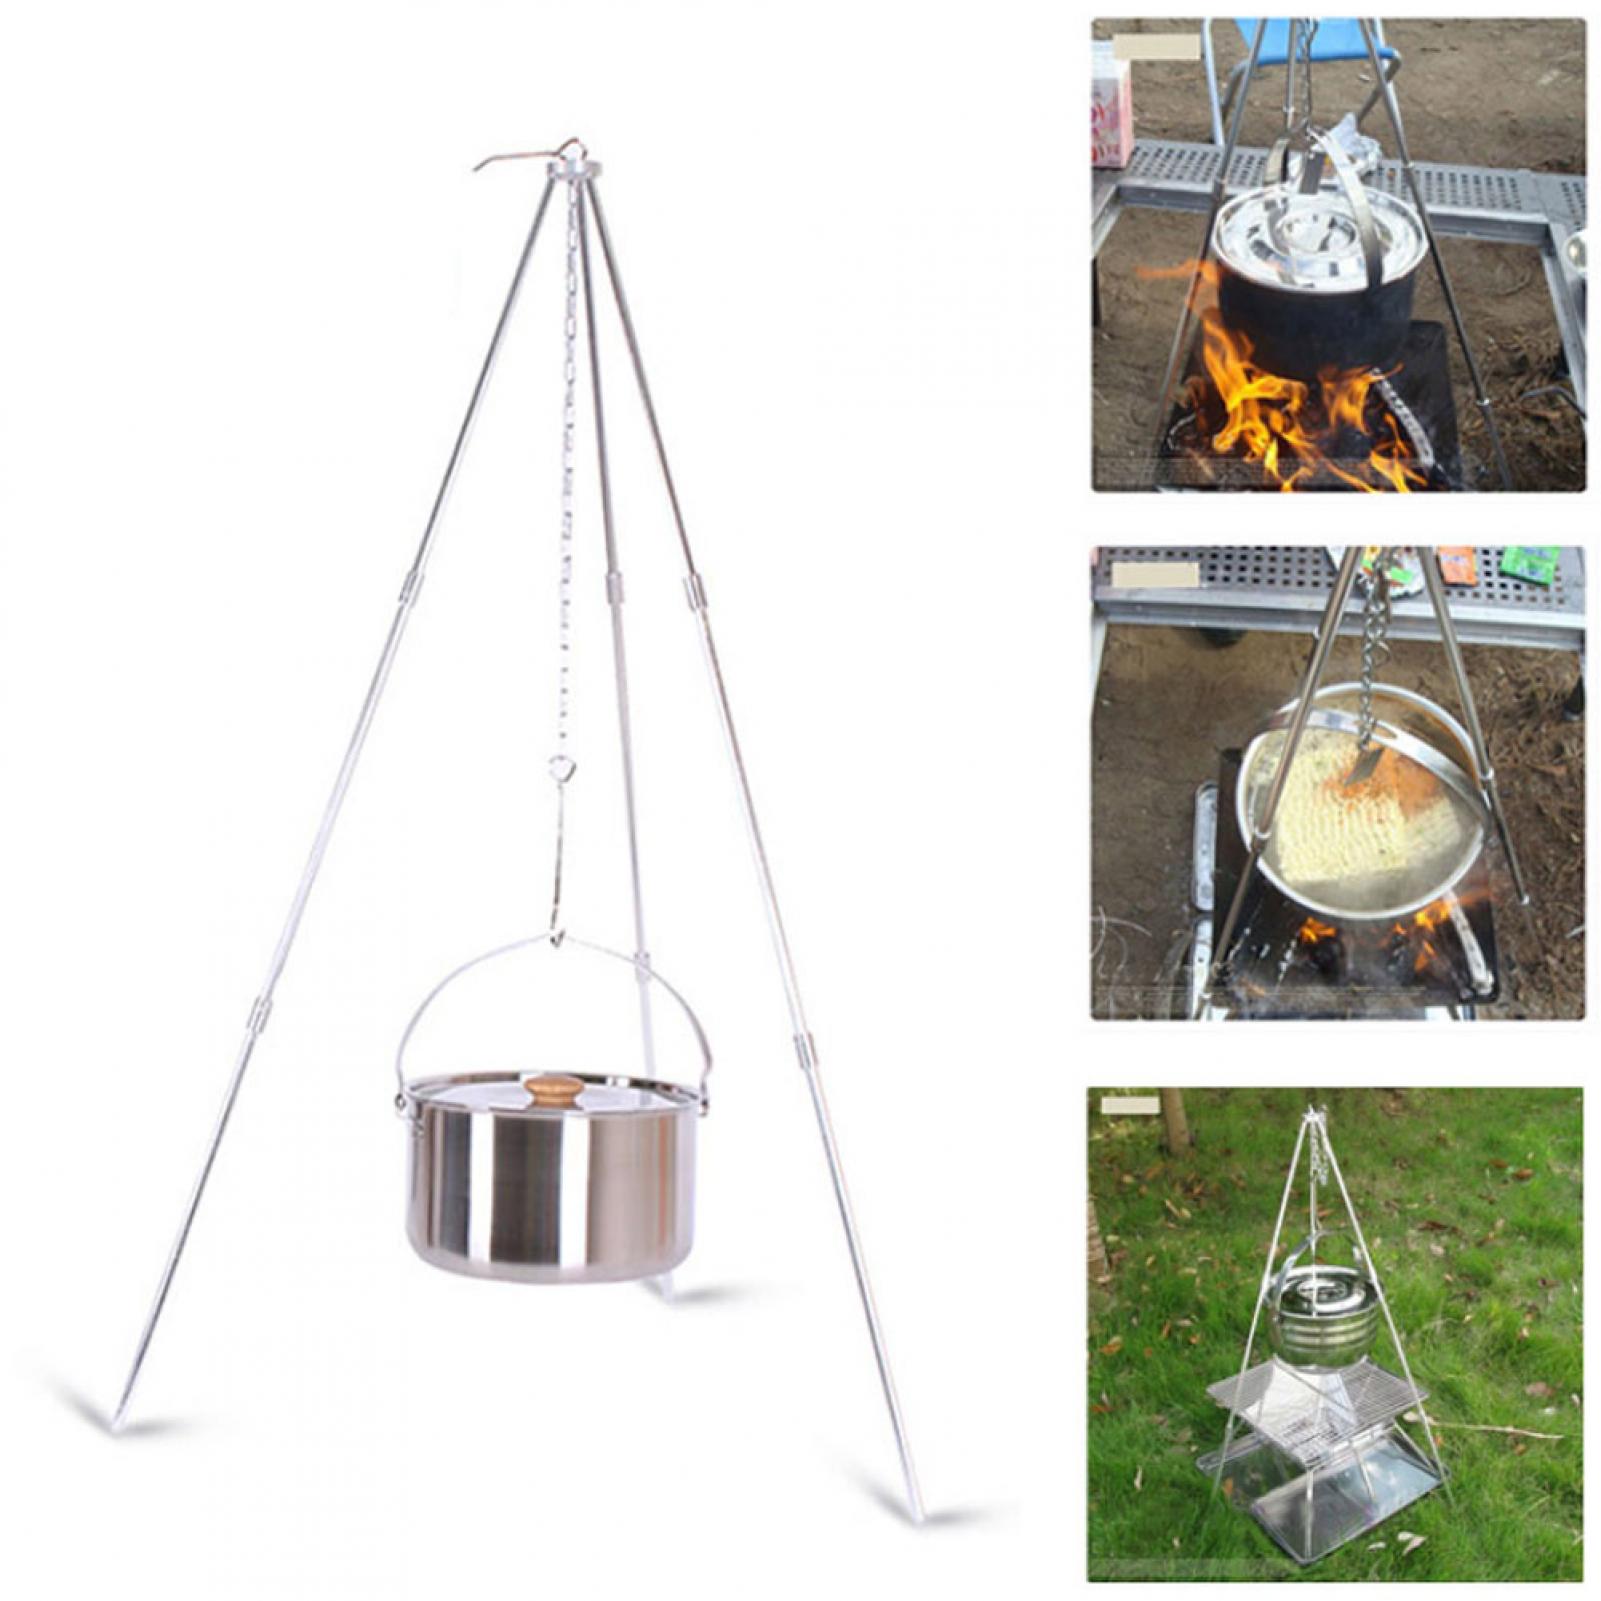 Outdoor Portable Foldable Metal Barbecue Grills Hanging Tripod Camping Picnic BBQ Cooking, Foldable Grills - image 2 of 7